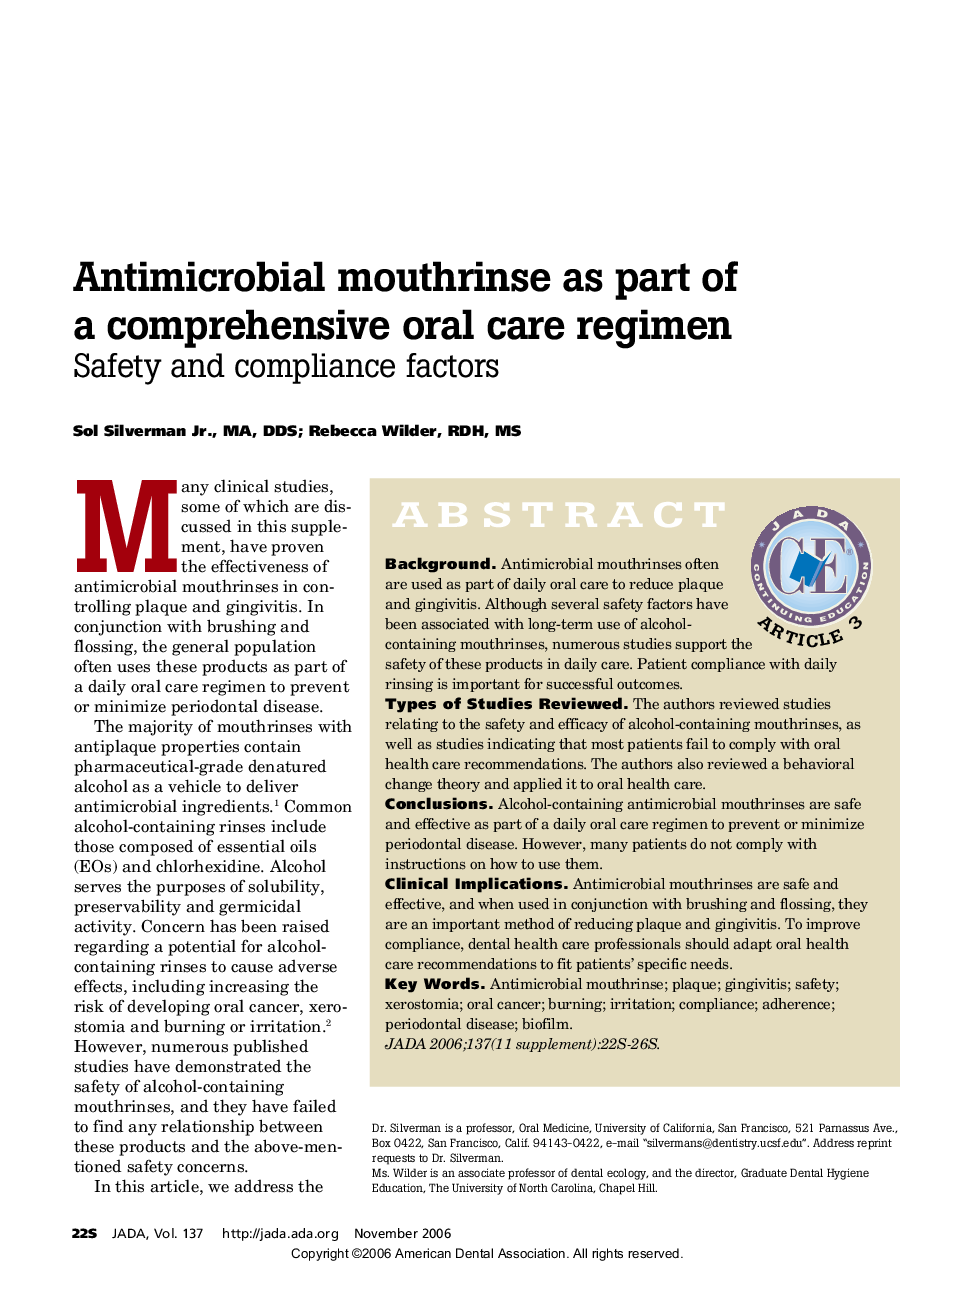 Antimicrobial mouthrinse as part of a comprehensive oral care regimen: Safety and compliance factors